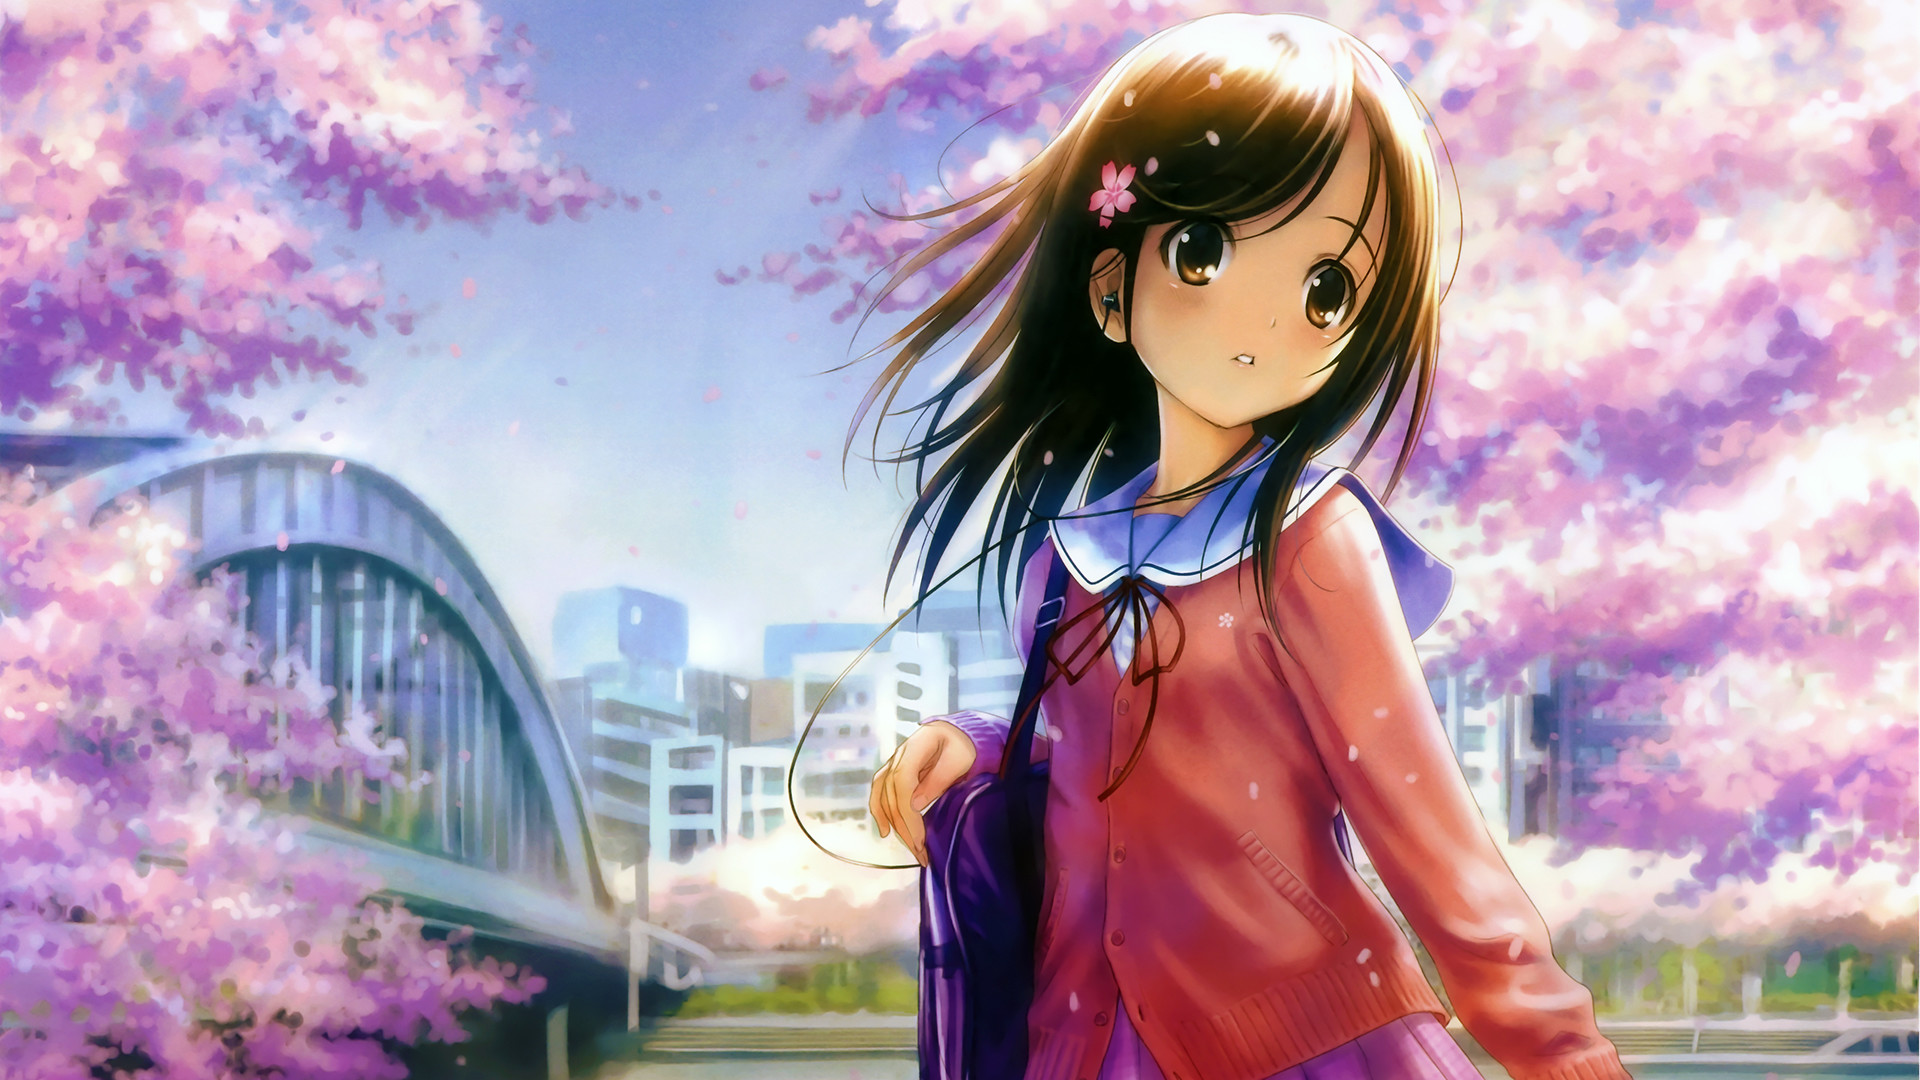 Cute Anime Wallpaper 1920X1080 (72+ Images)